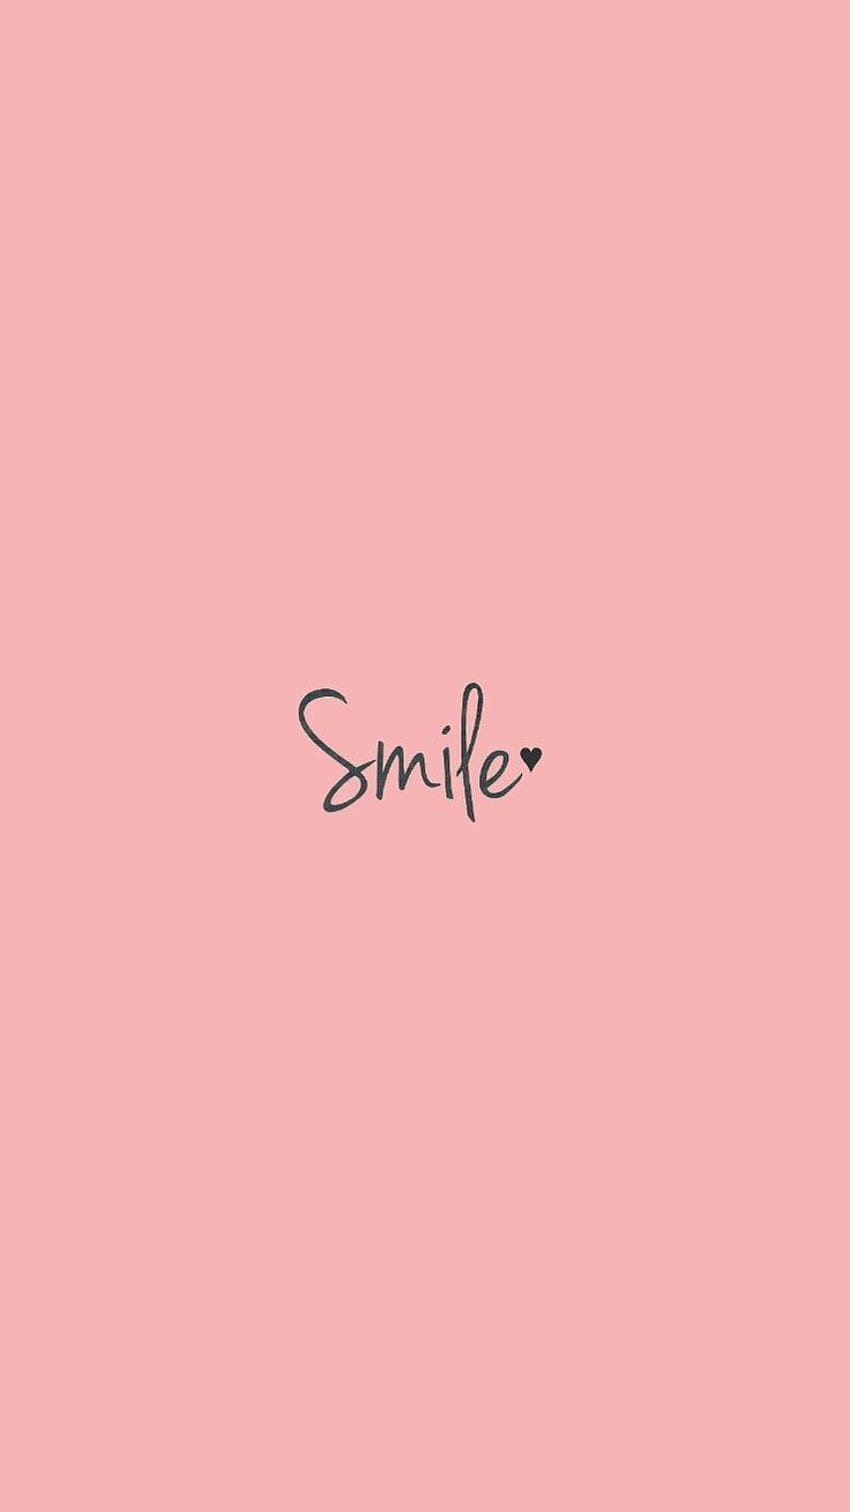 wallpaper quotes on smile